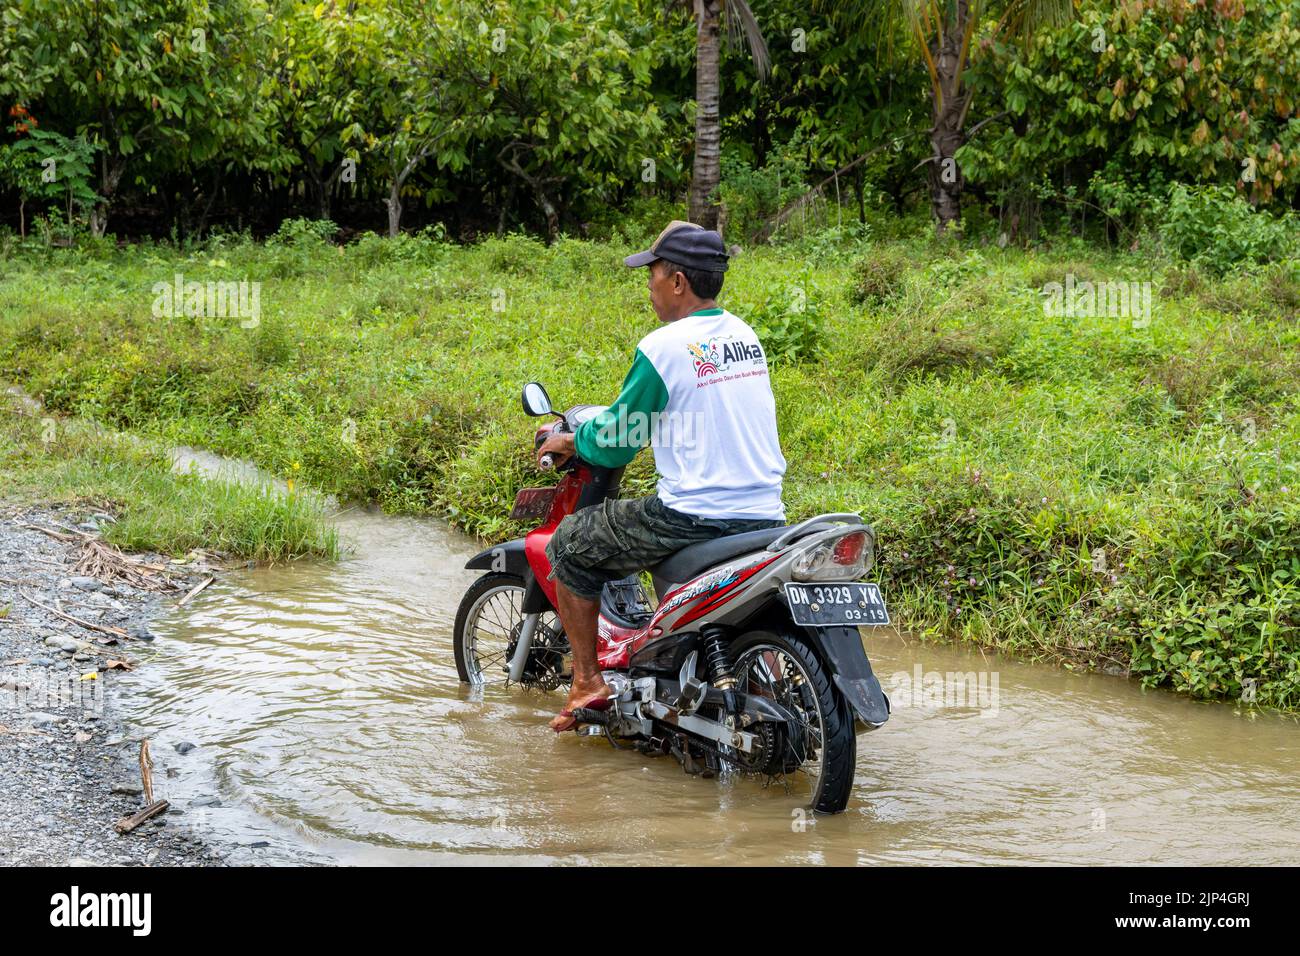 A local man washing his motor bike in a puddle. Sulawesi, Indonesia. Stock Photo